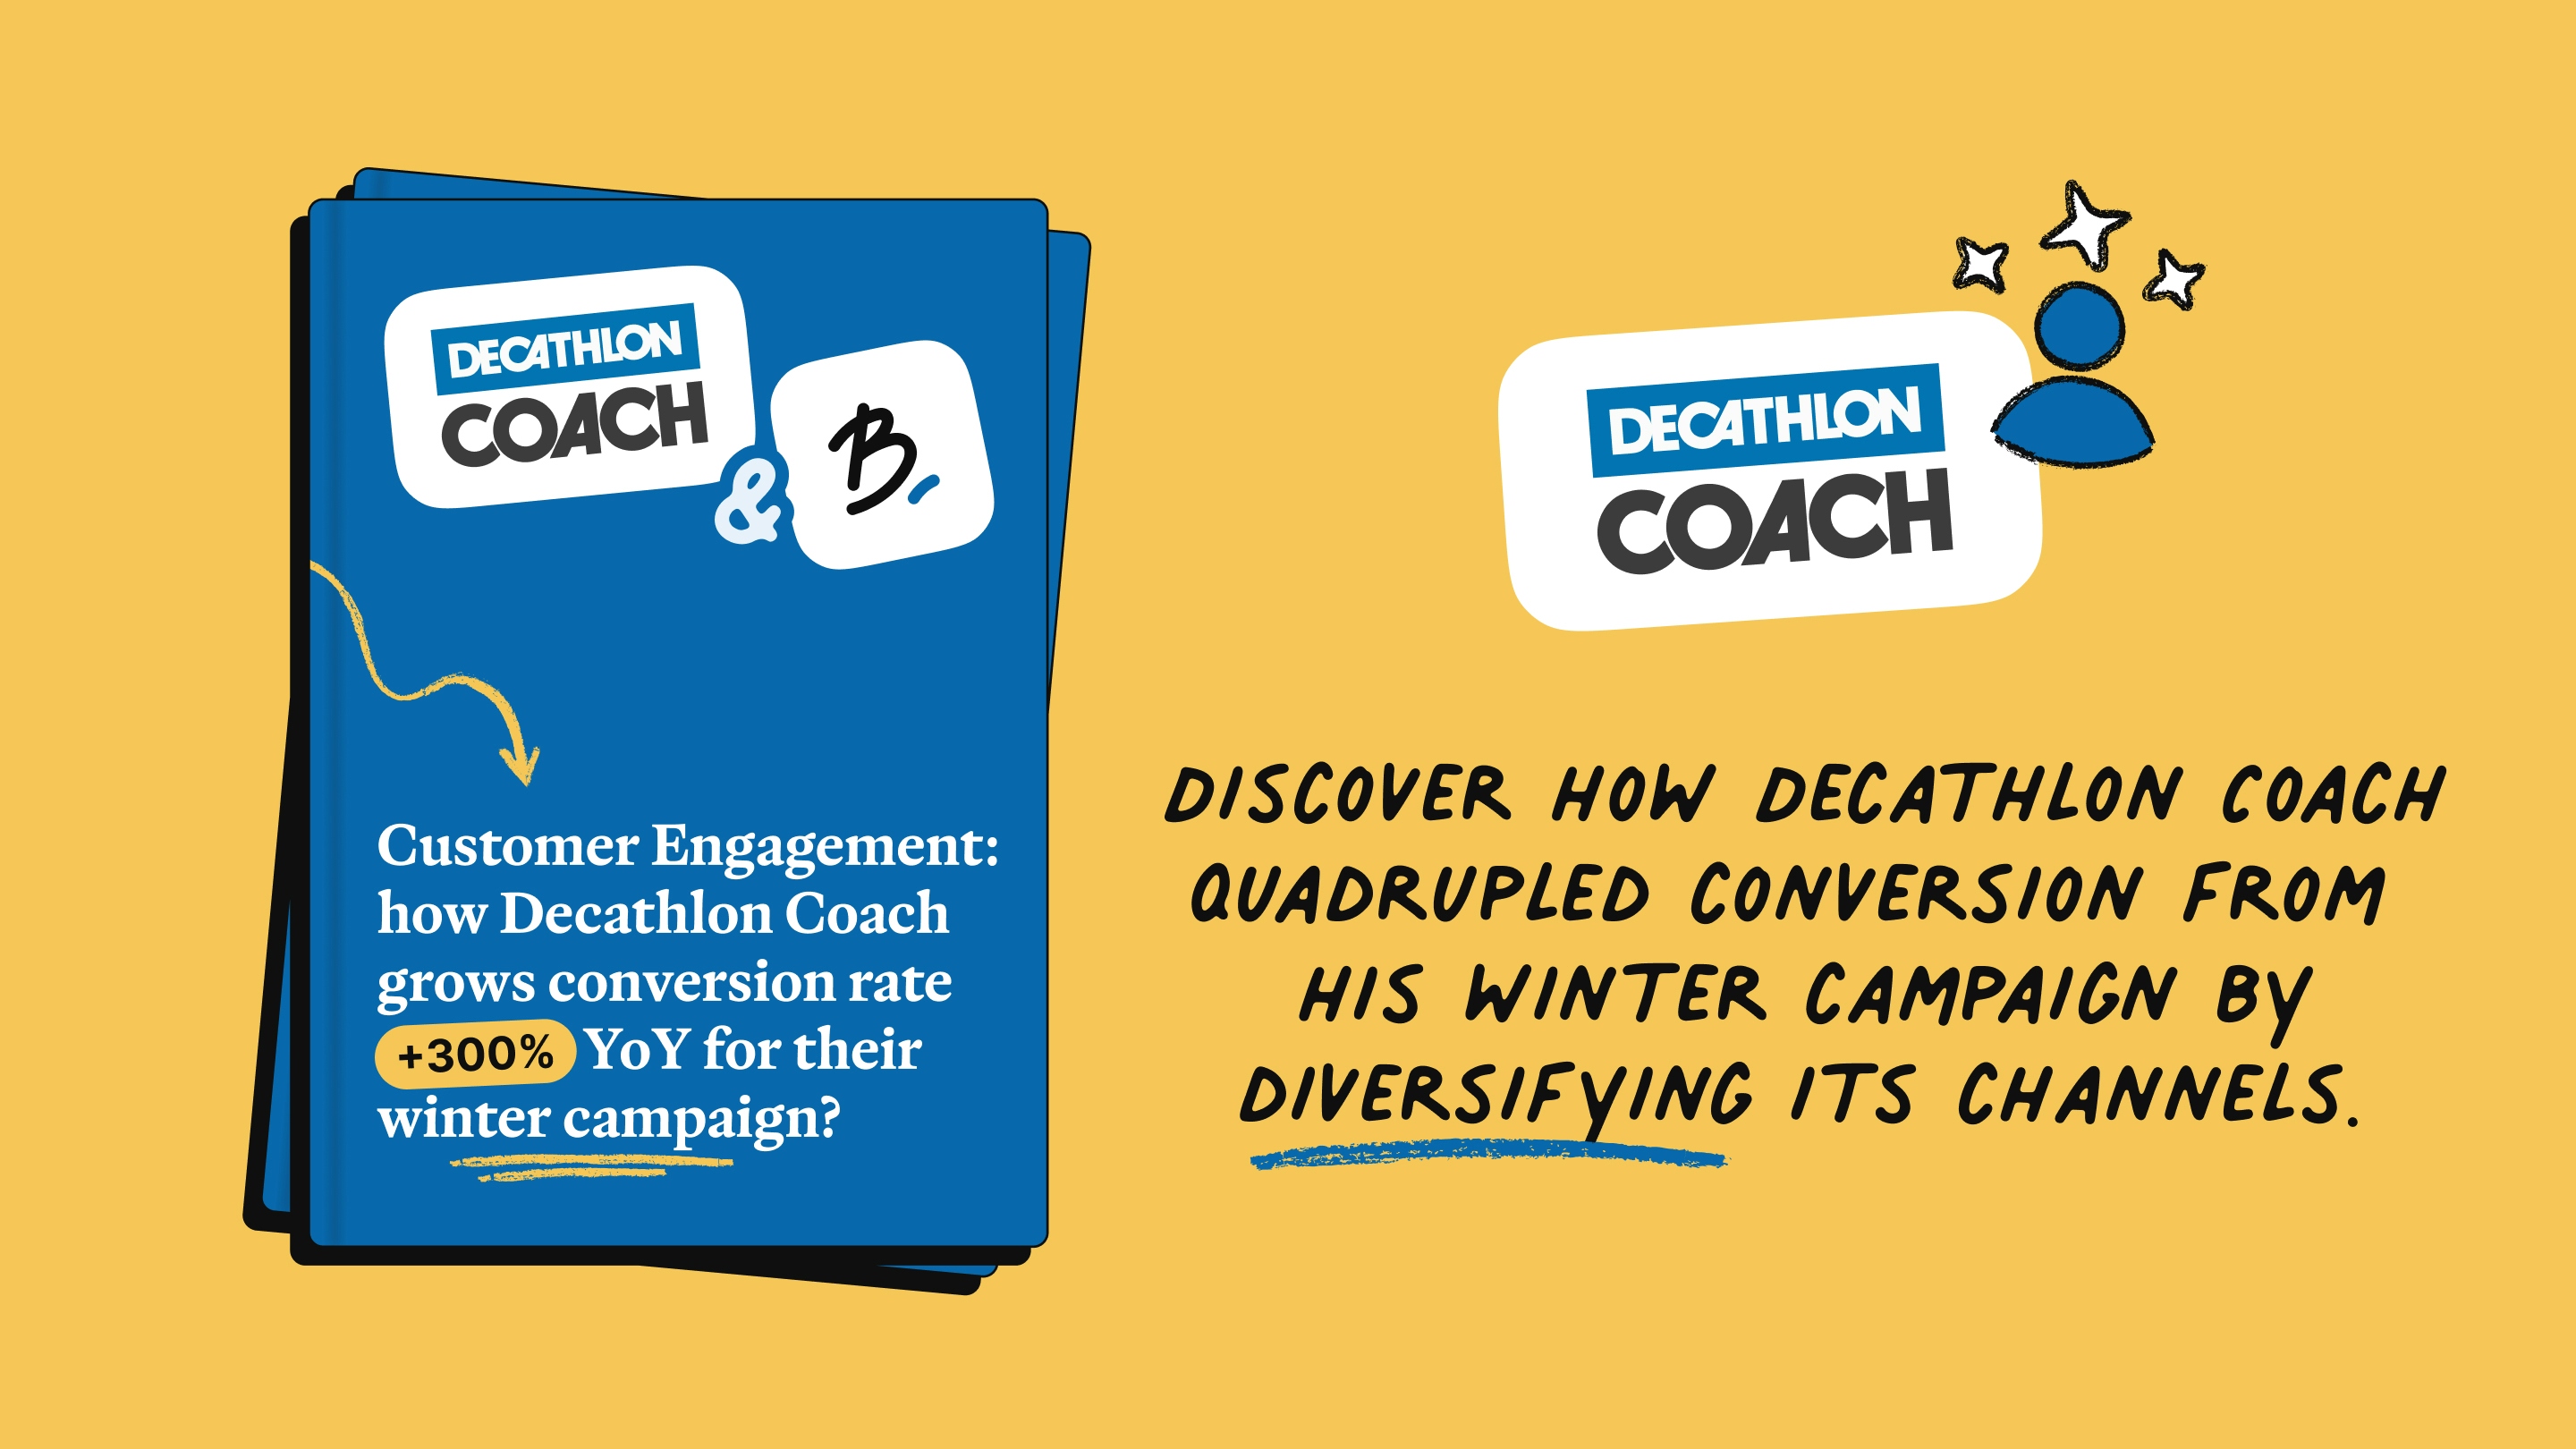 Customer engagement: how Decathlon Coach quadrupled its conversion rate in its annual 3-weeks challenge?